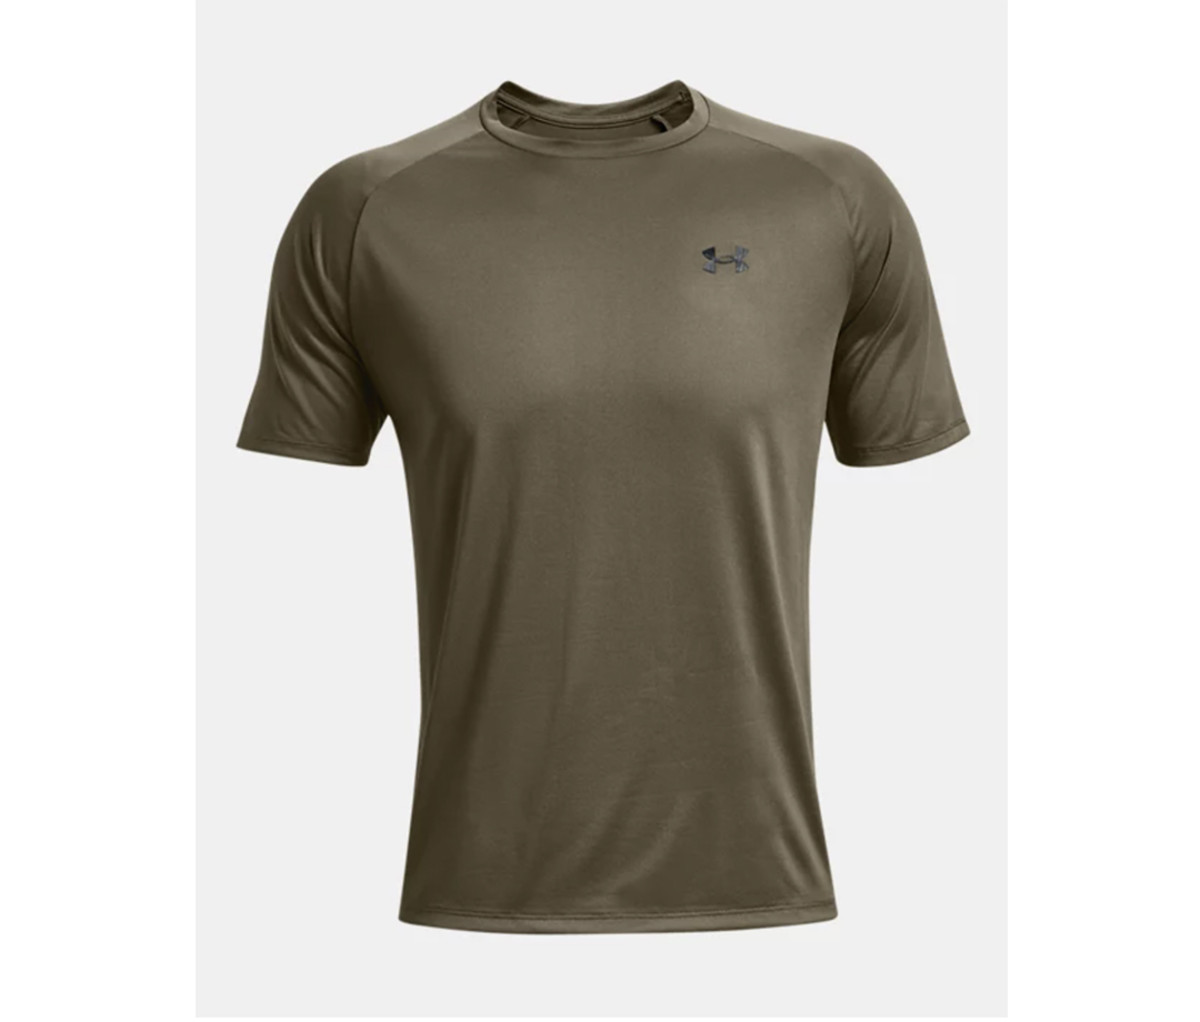 Get up to 50% Off at Under Armour Until July 6th 2022 - Men's Journal